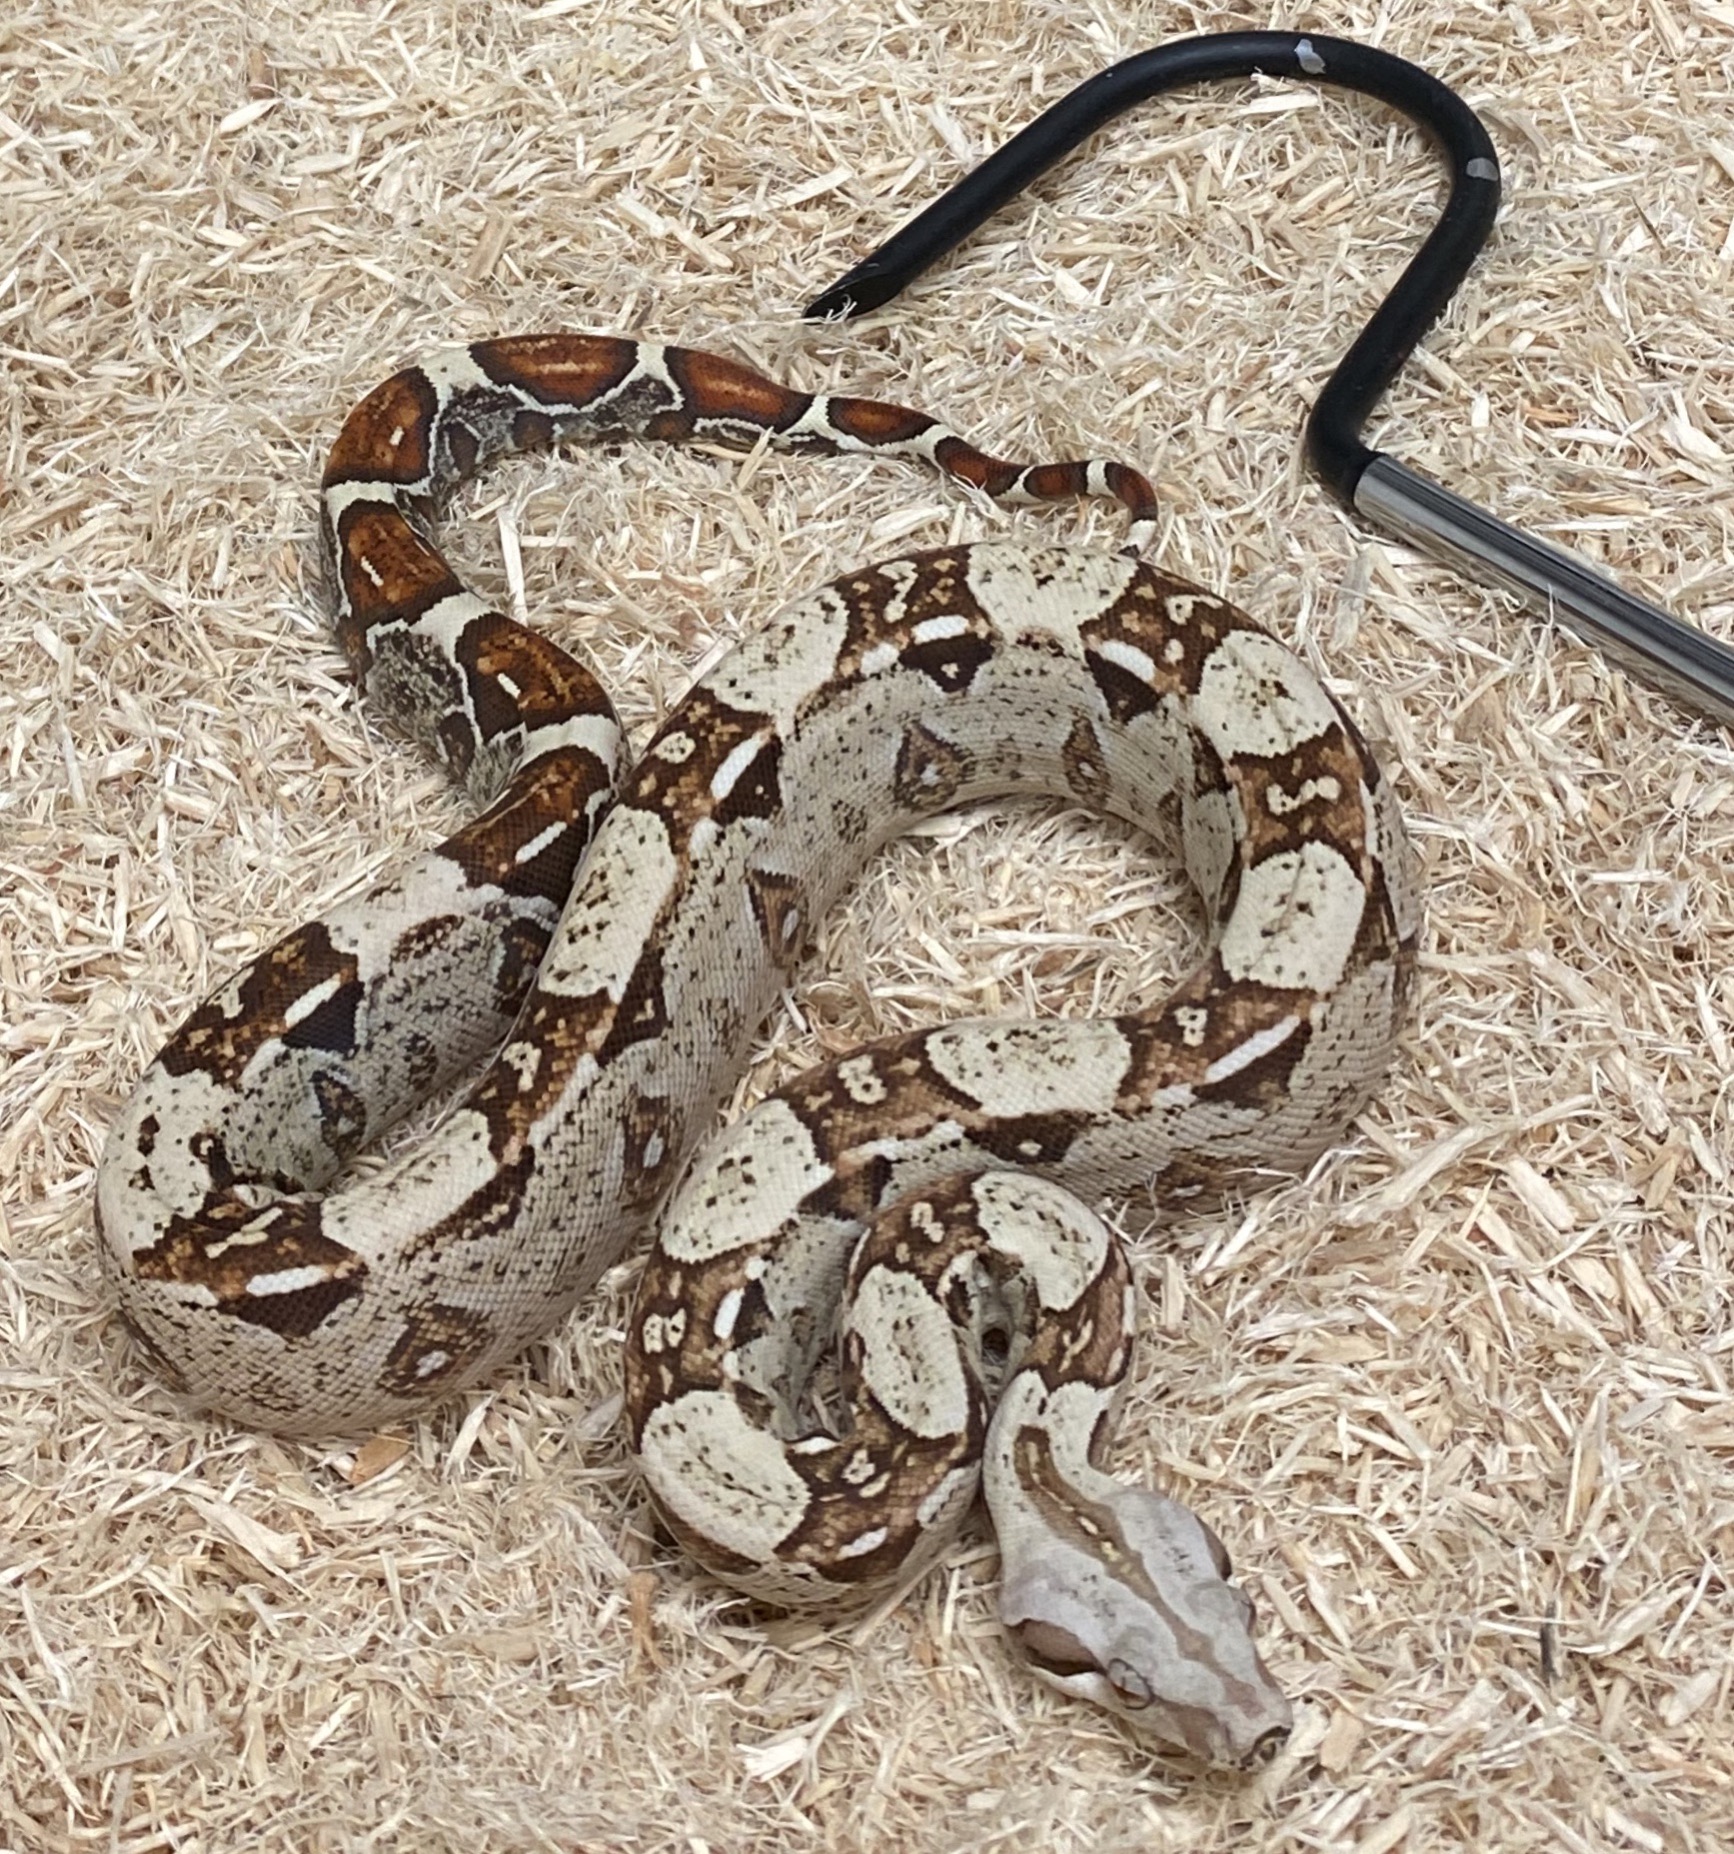 VPI T+ Boa Constrictor by Motion Reptiles